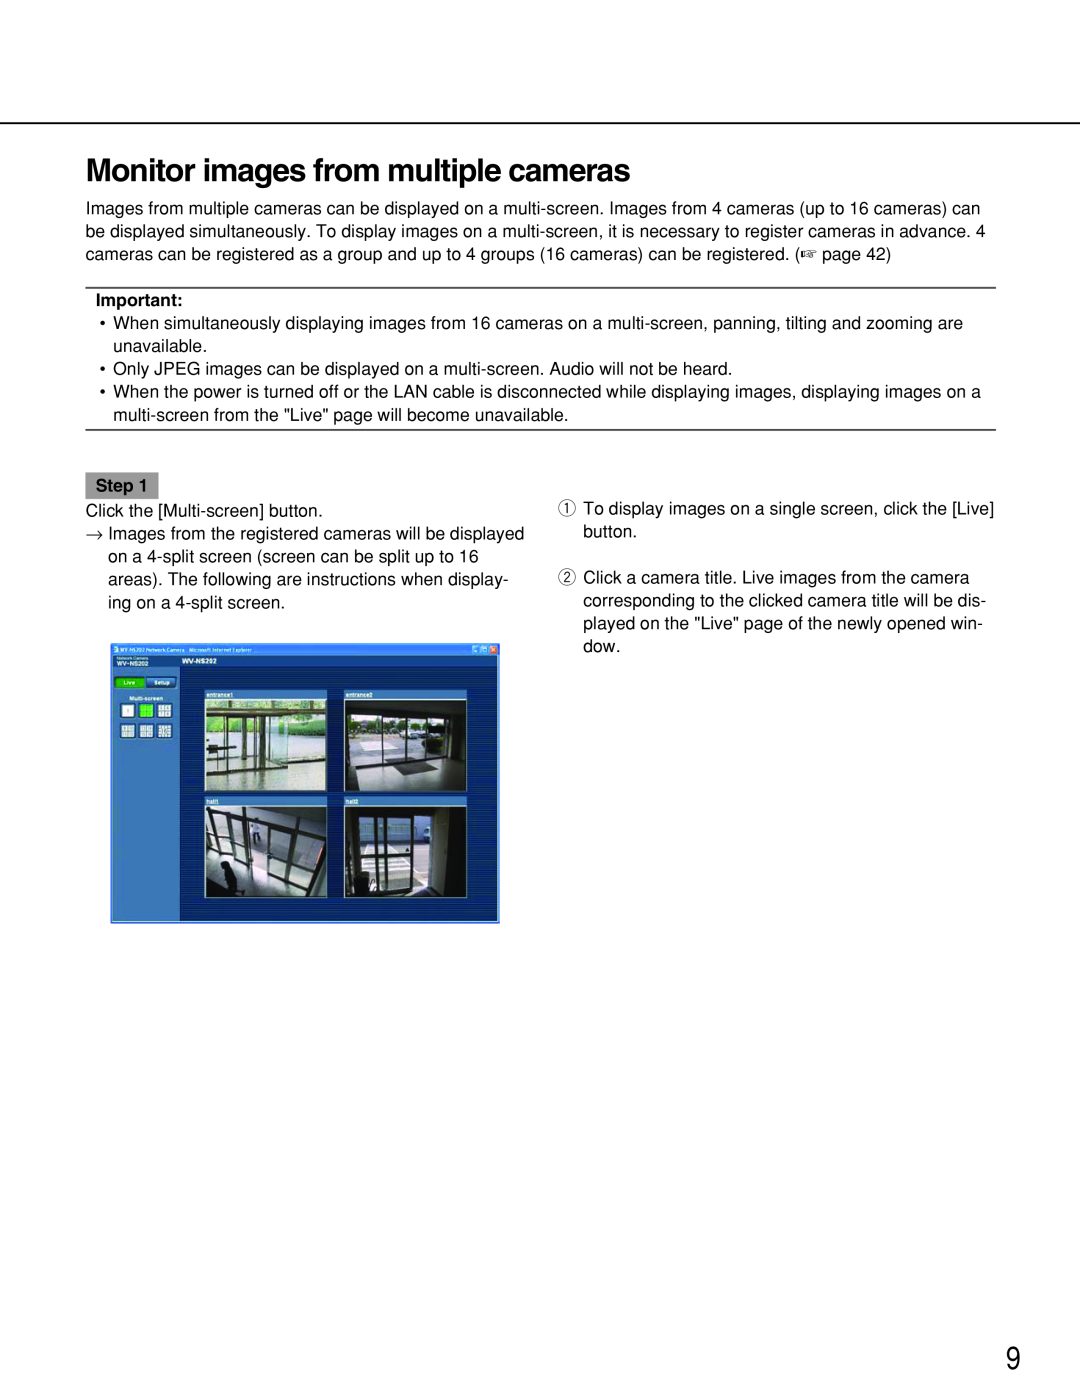 Panasonic WV-NS202 operating instructions Monitor images from multiple cameras, Step 